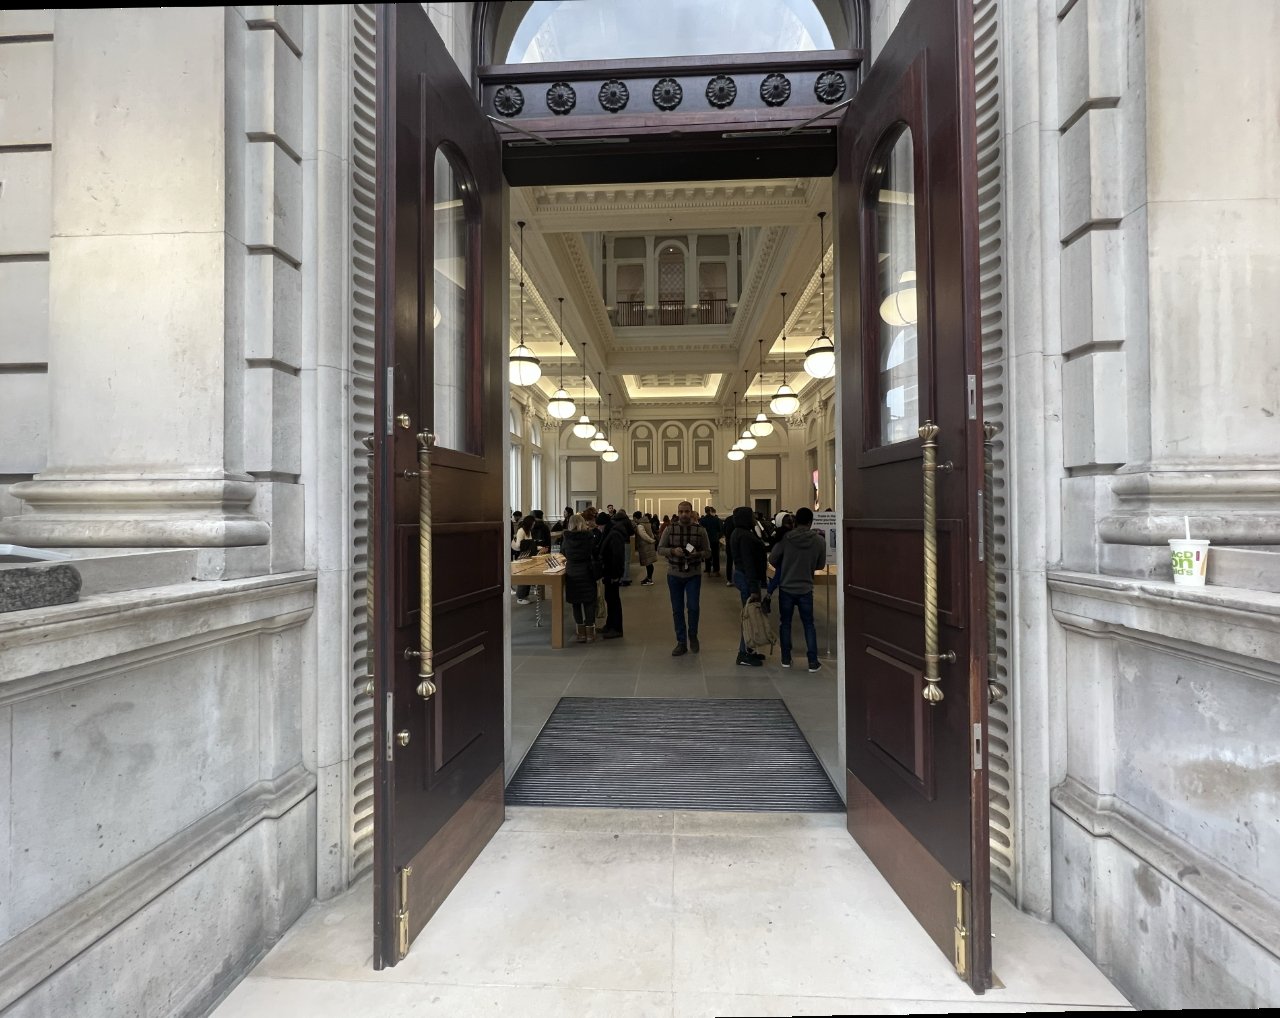 Step through the 19th Century bank doors to the Apple Store